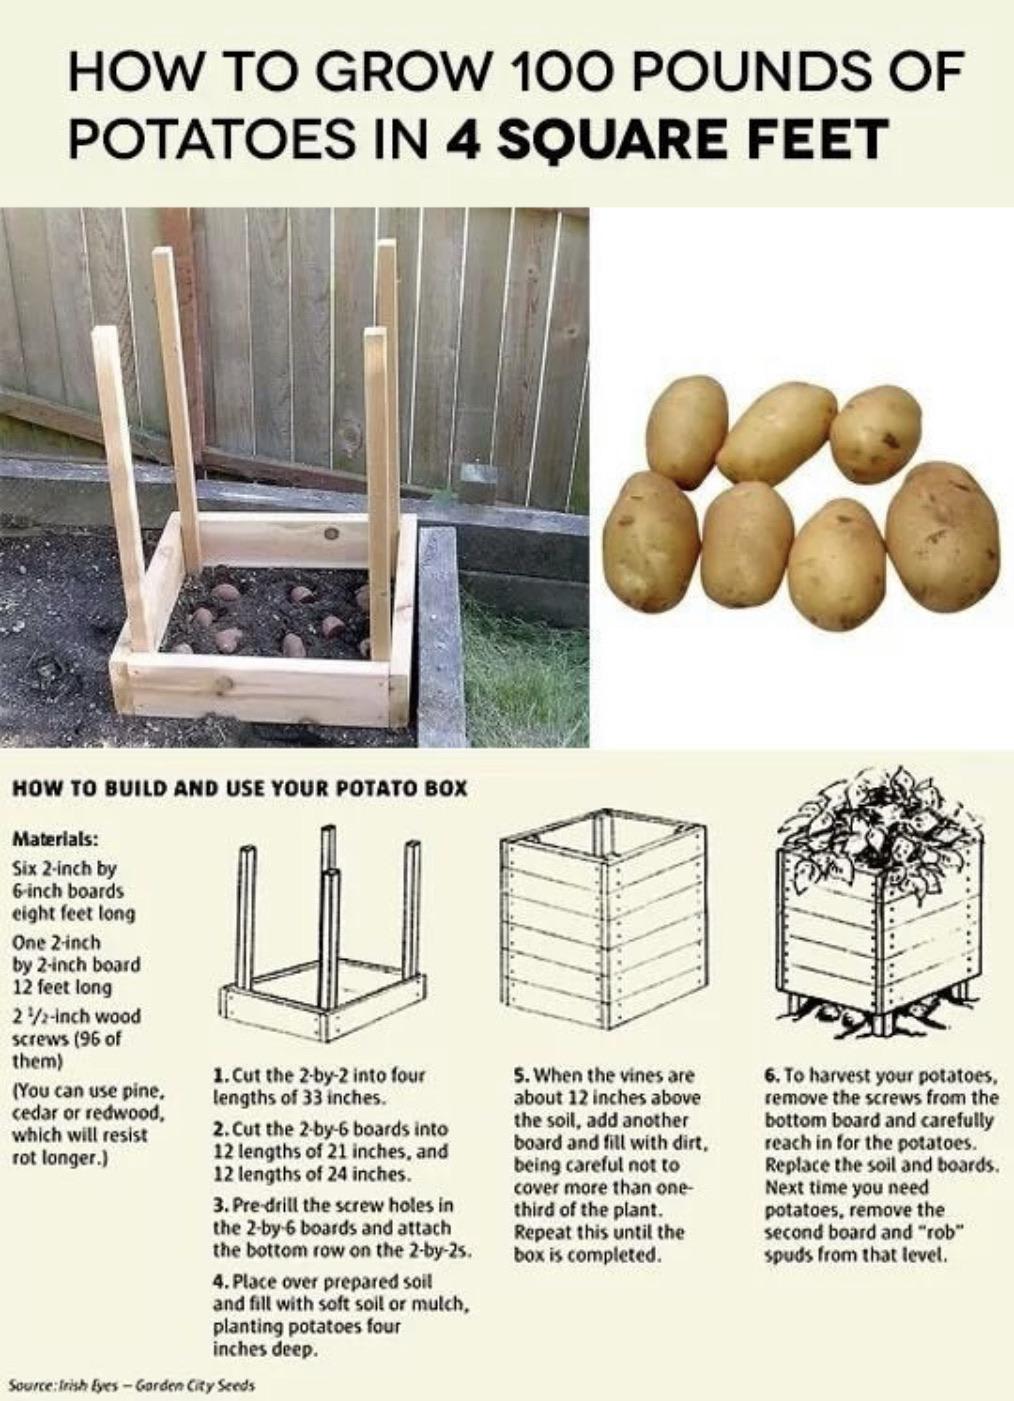 If you ever want to grow potatoes (maybe you’re trapped on the surface of Mars) here’s a guide to do so!